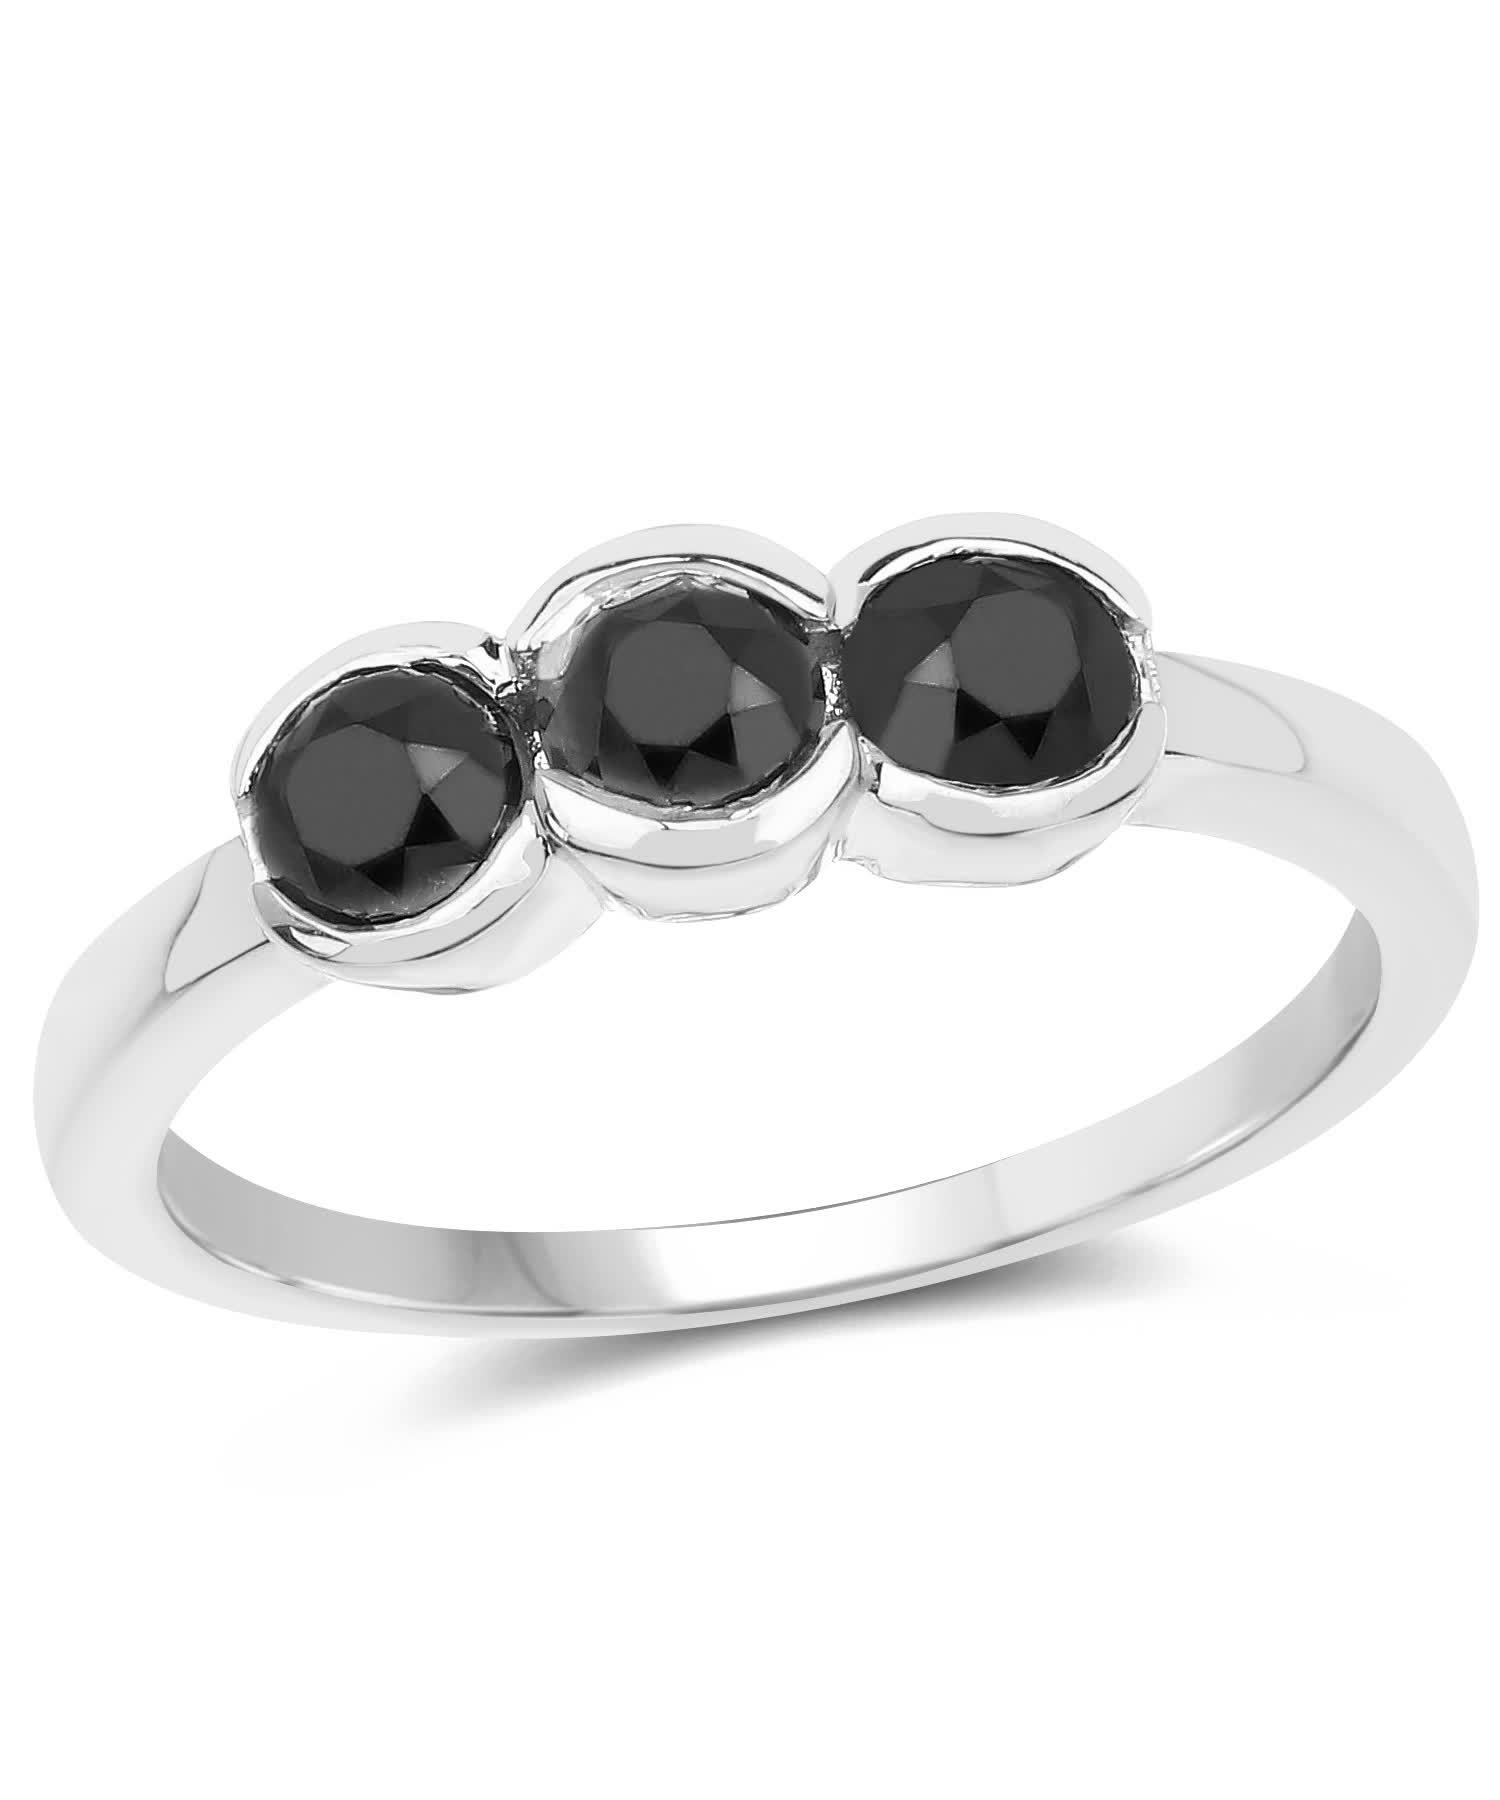 1.16ctw Natural Black Diamond Rhodium Plated 925 Sterling Silver Three-Stone Ring View 1